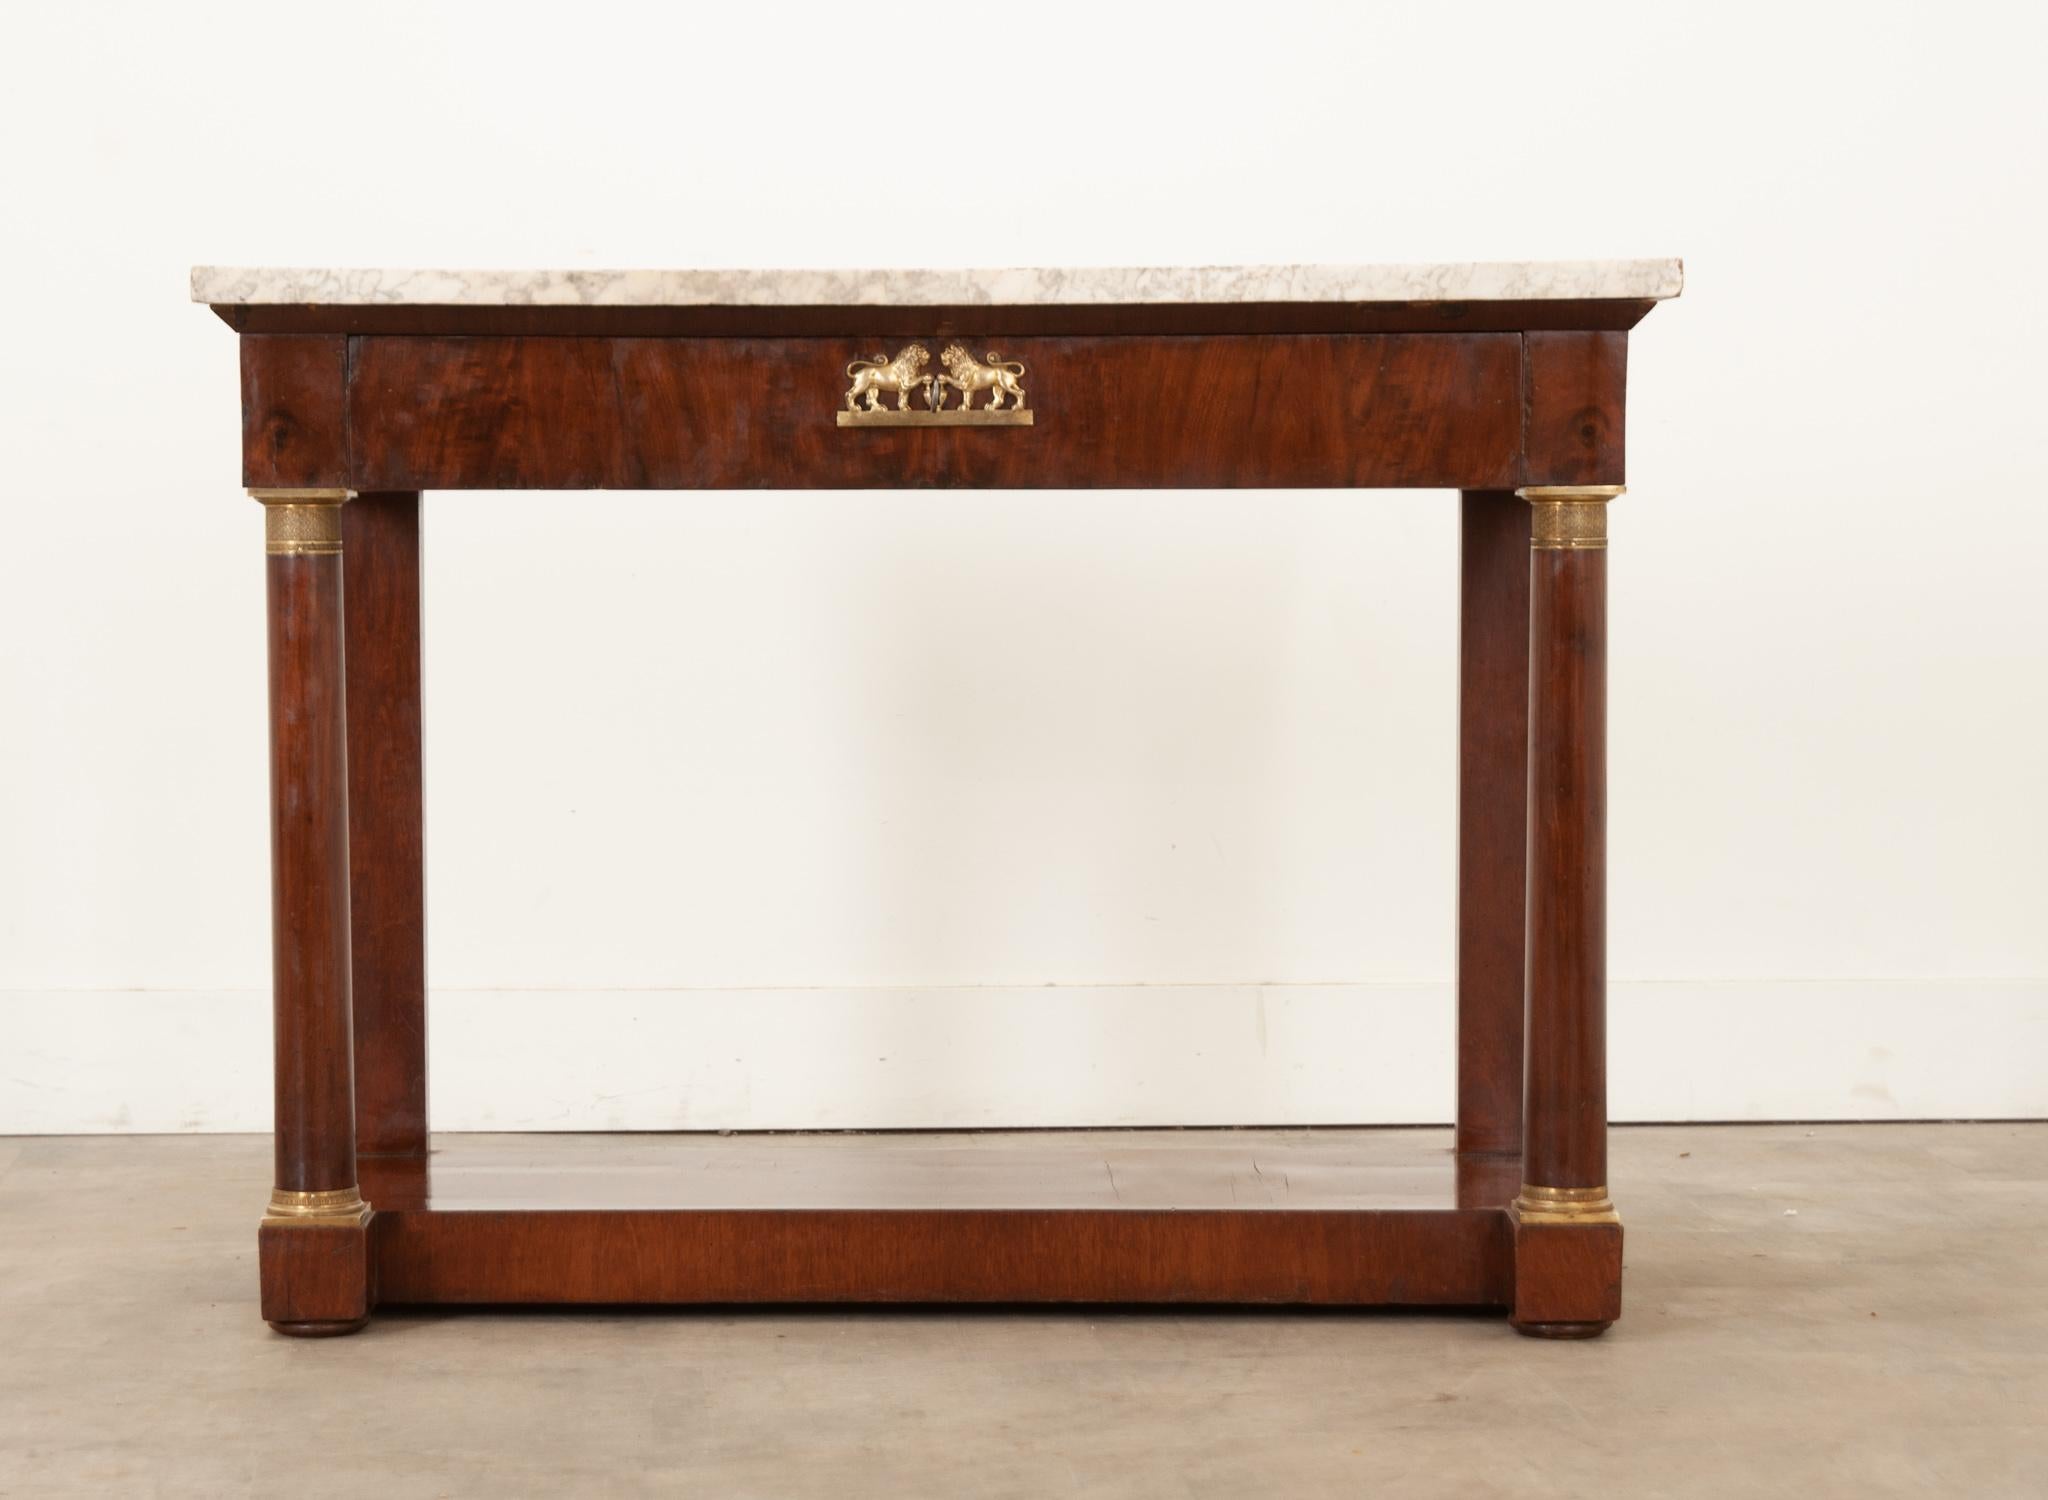 A classic French Empire console from the 19th century. Made of  warmly toned mahogany, it has gained a wonderful patina over the centuries. It retains its original white marble top with little nicks and patina, showing its age. The simple apron